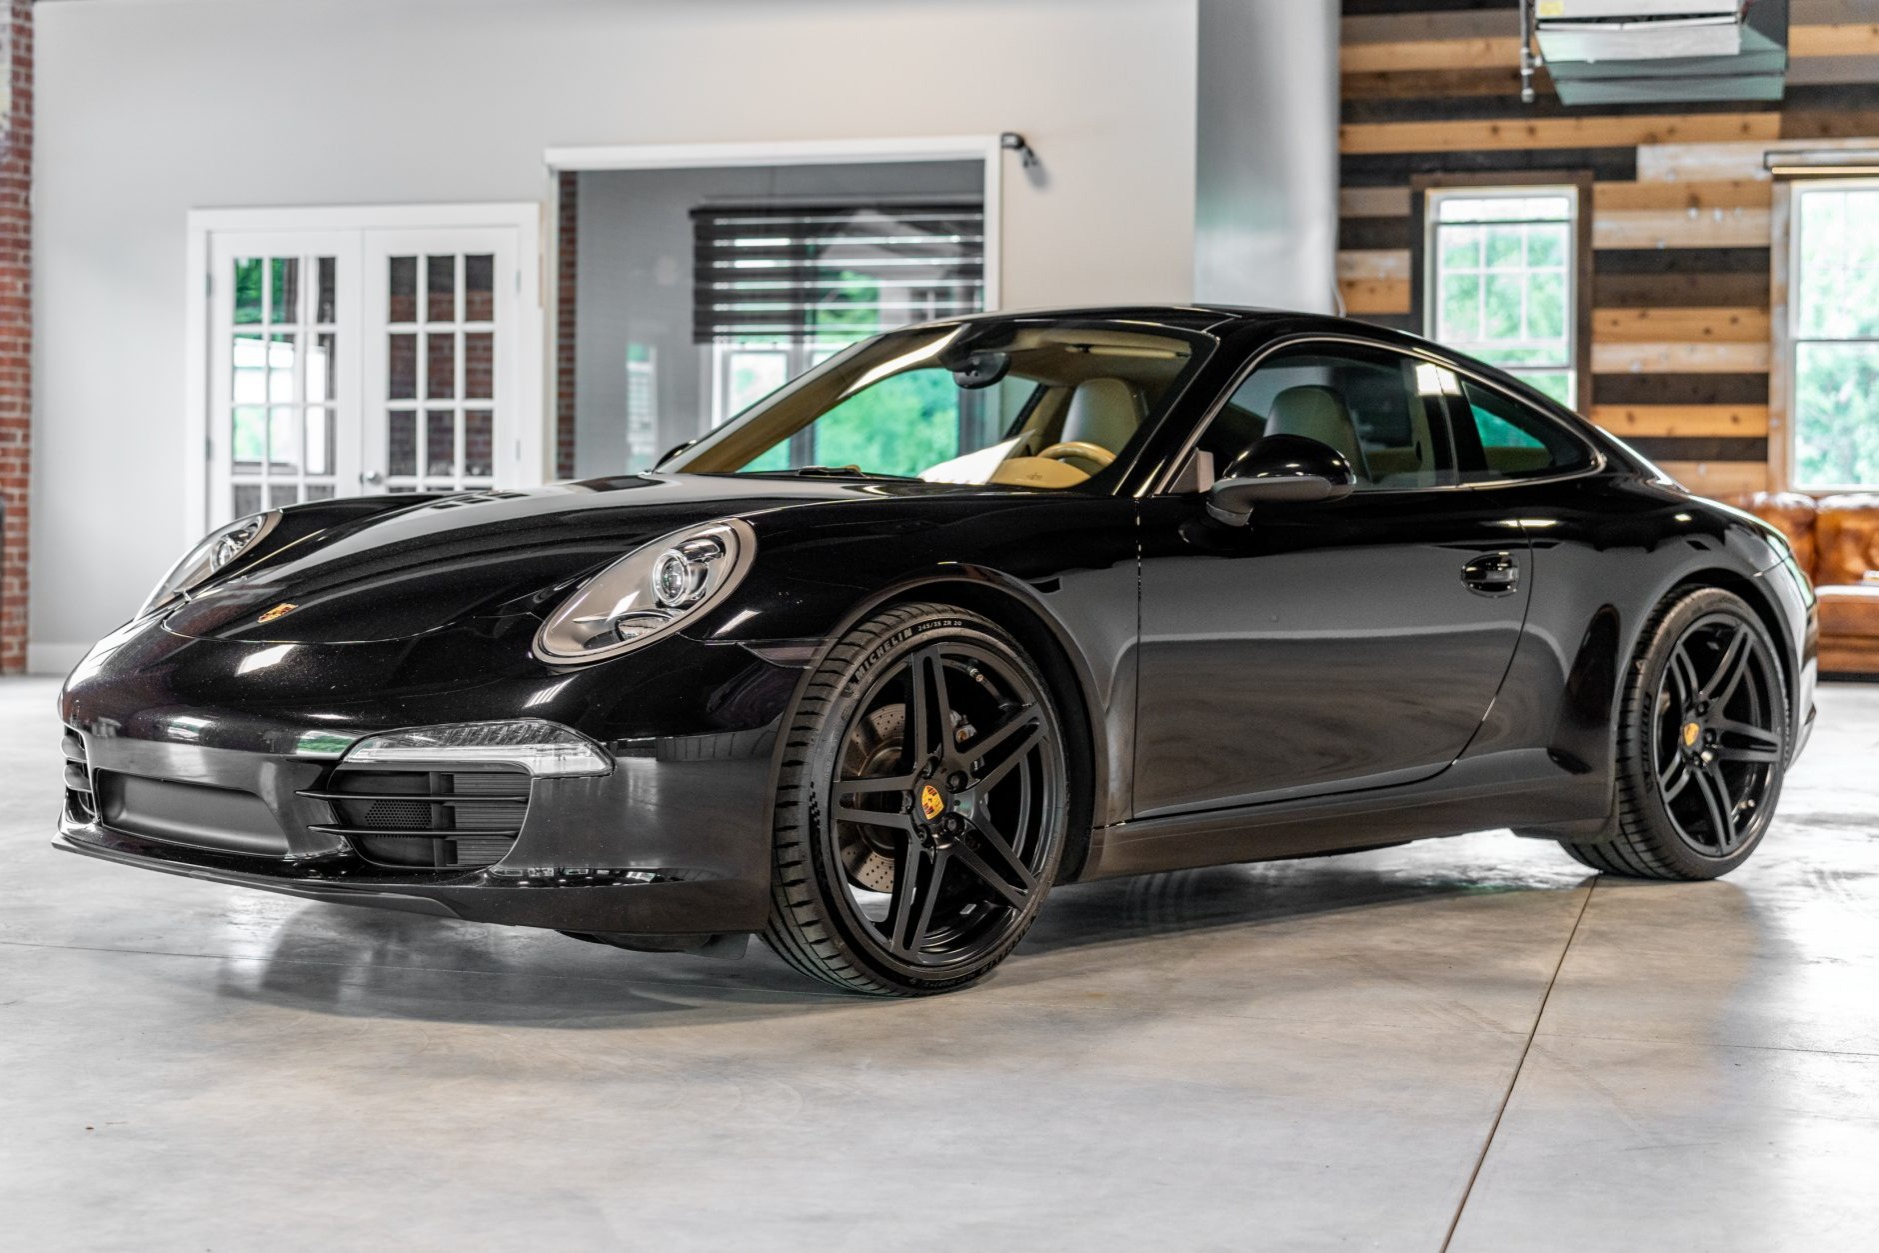 Used 2015 Porsche 911 Carrera Coupe 7-Speed Review